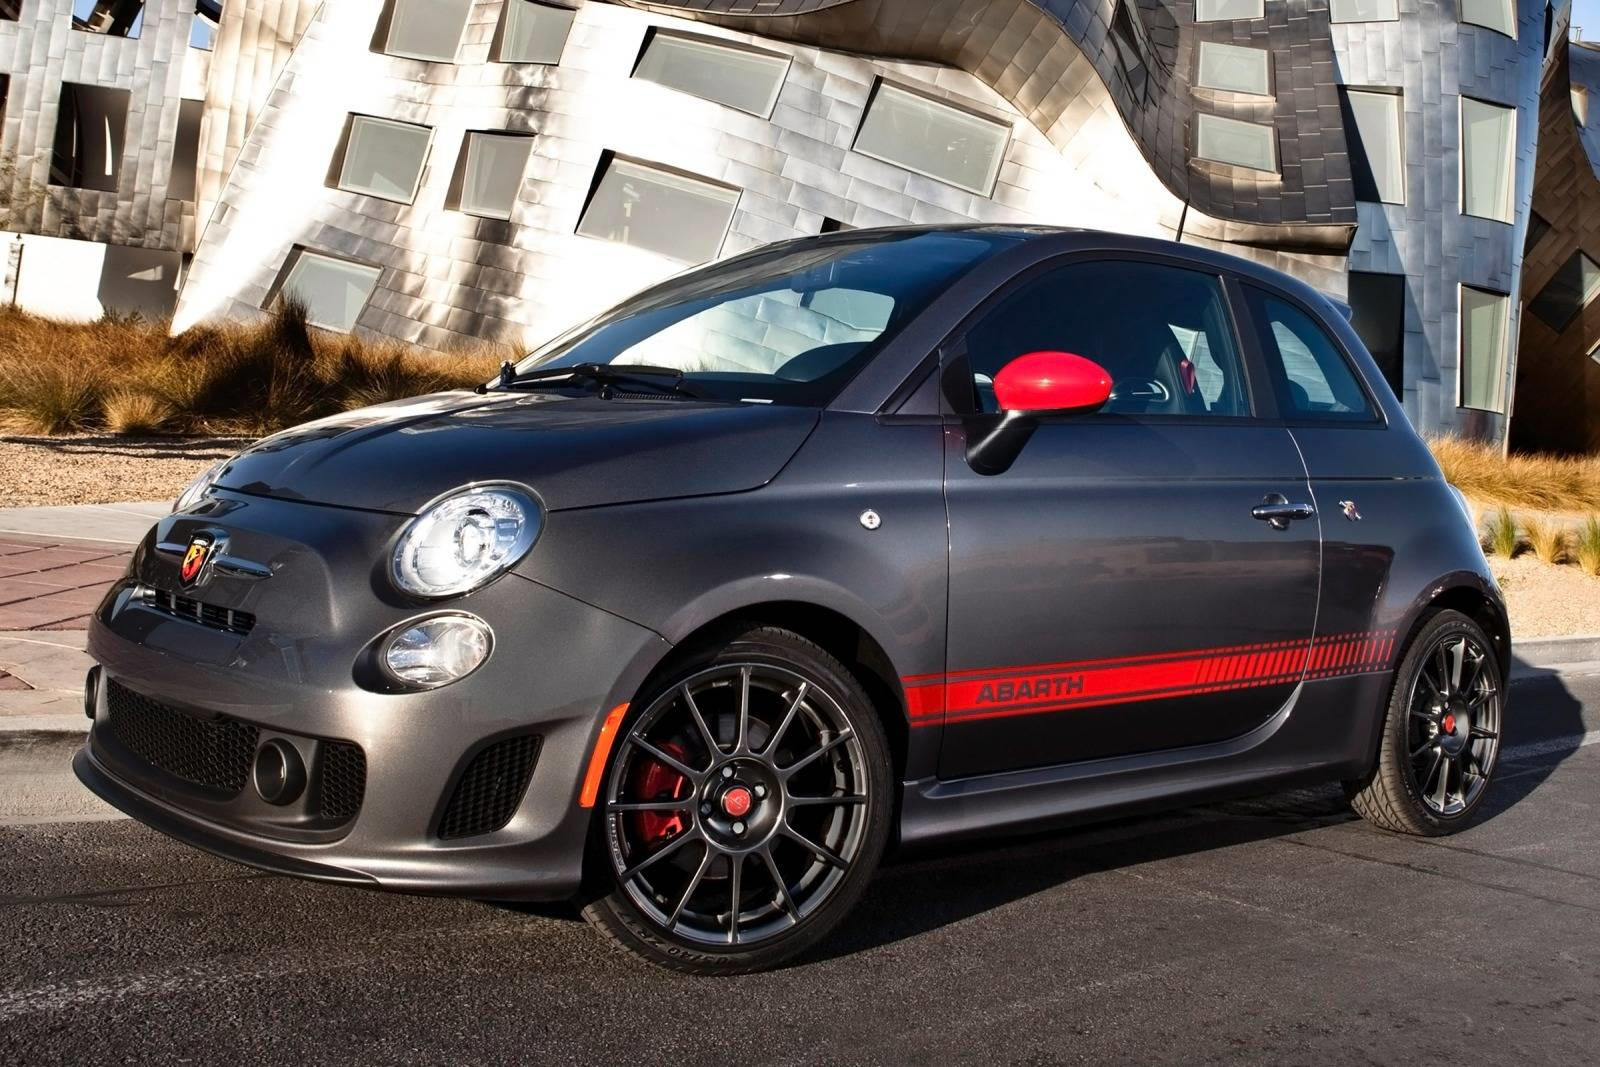 2019 Fiat 500 Abarth Review Trims Specs Price New Interior Features Exterior Design And Specifications Carbuzz